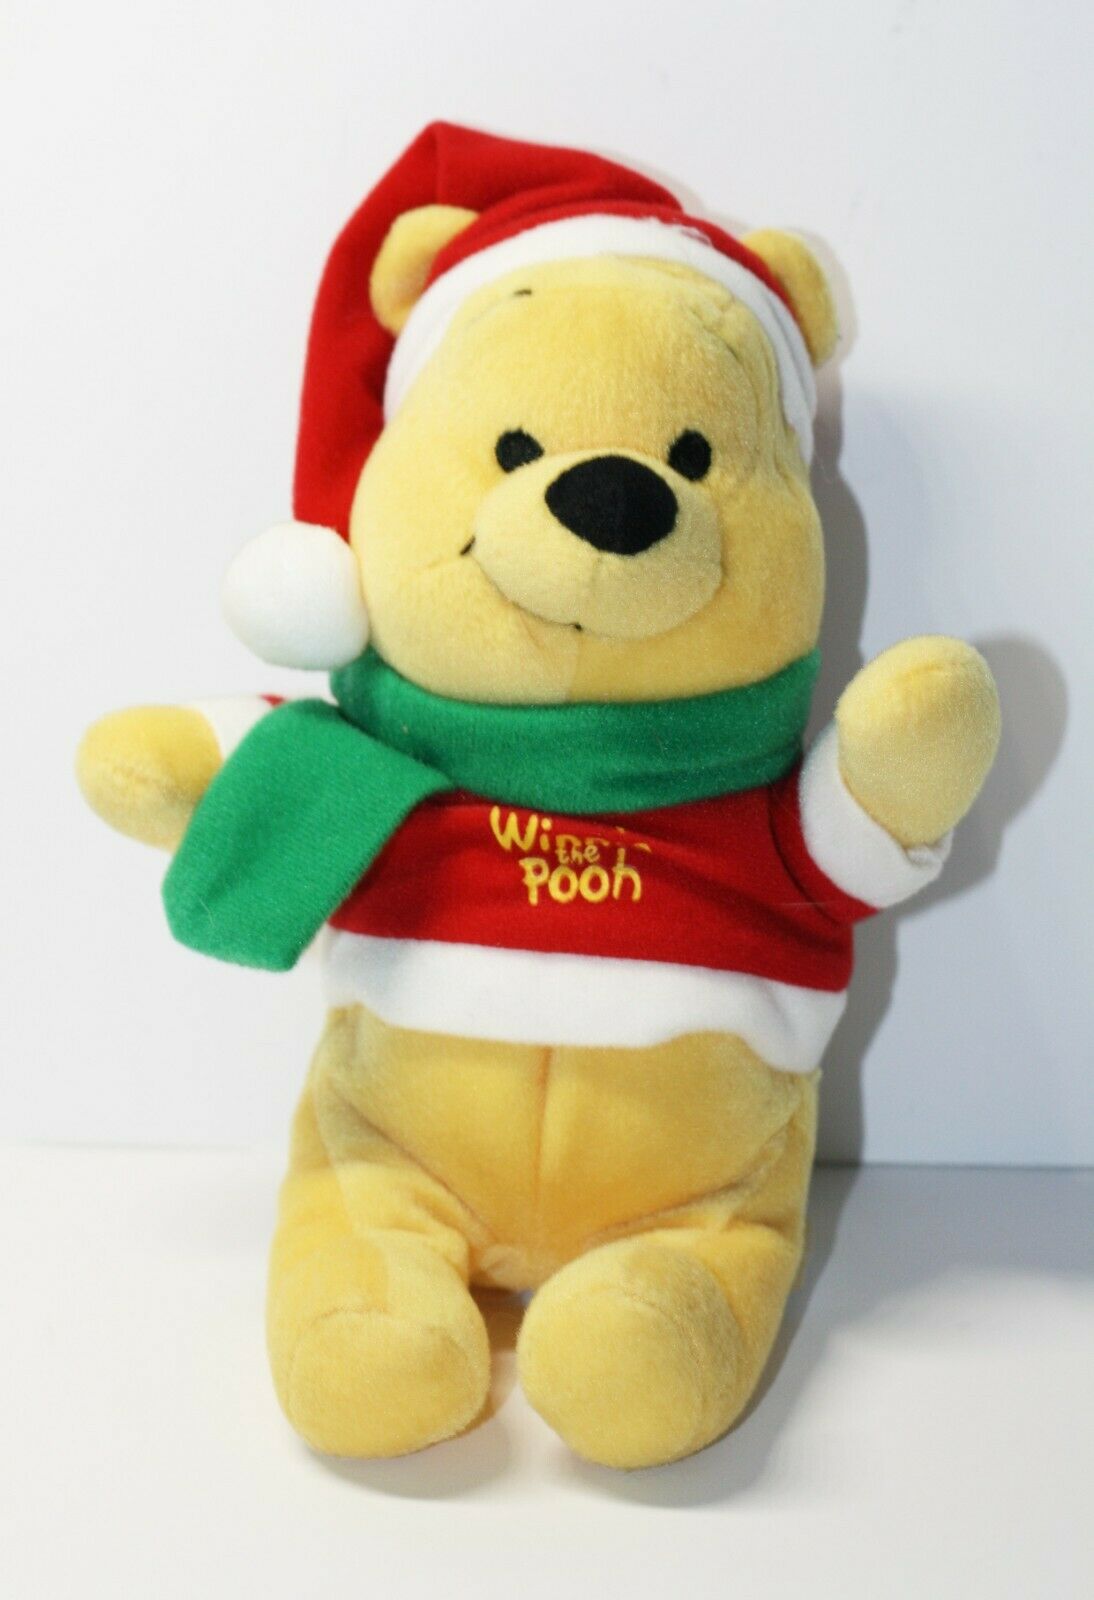 Disney Winnie The Pooh In Winter Hat Scarf Red Green 8" Plush Stuffed Toy